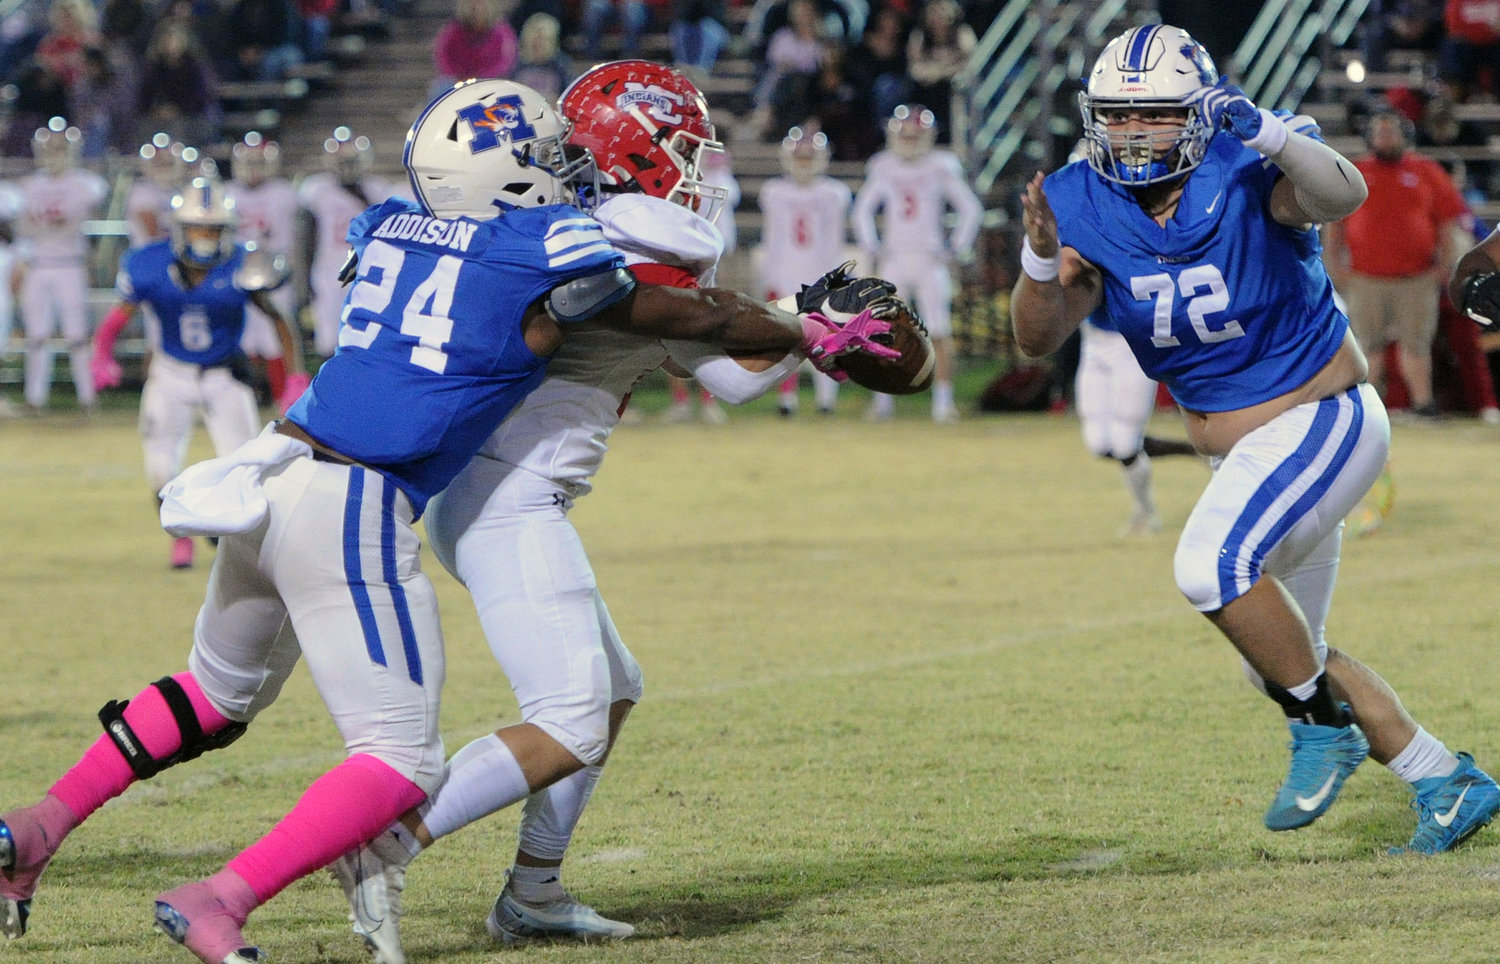 Lavonte Addison (24) and Anthony Diaz (72) converge to make the stop for the Tiger defense.